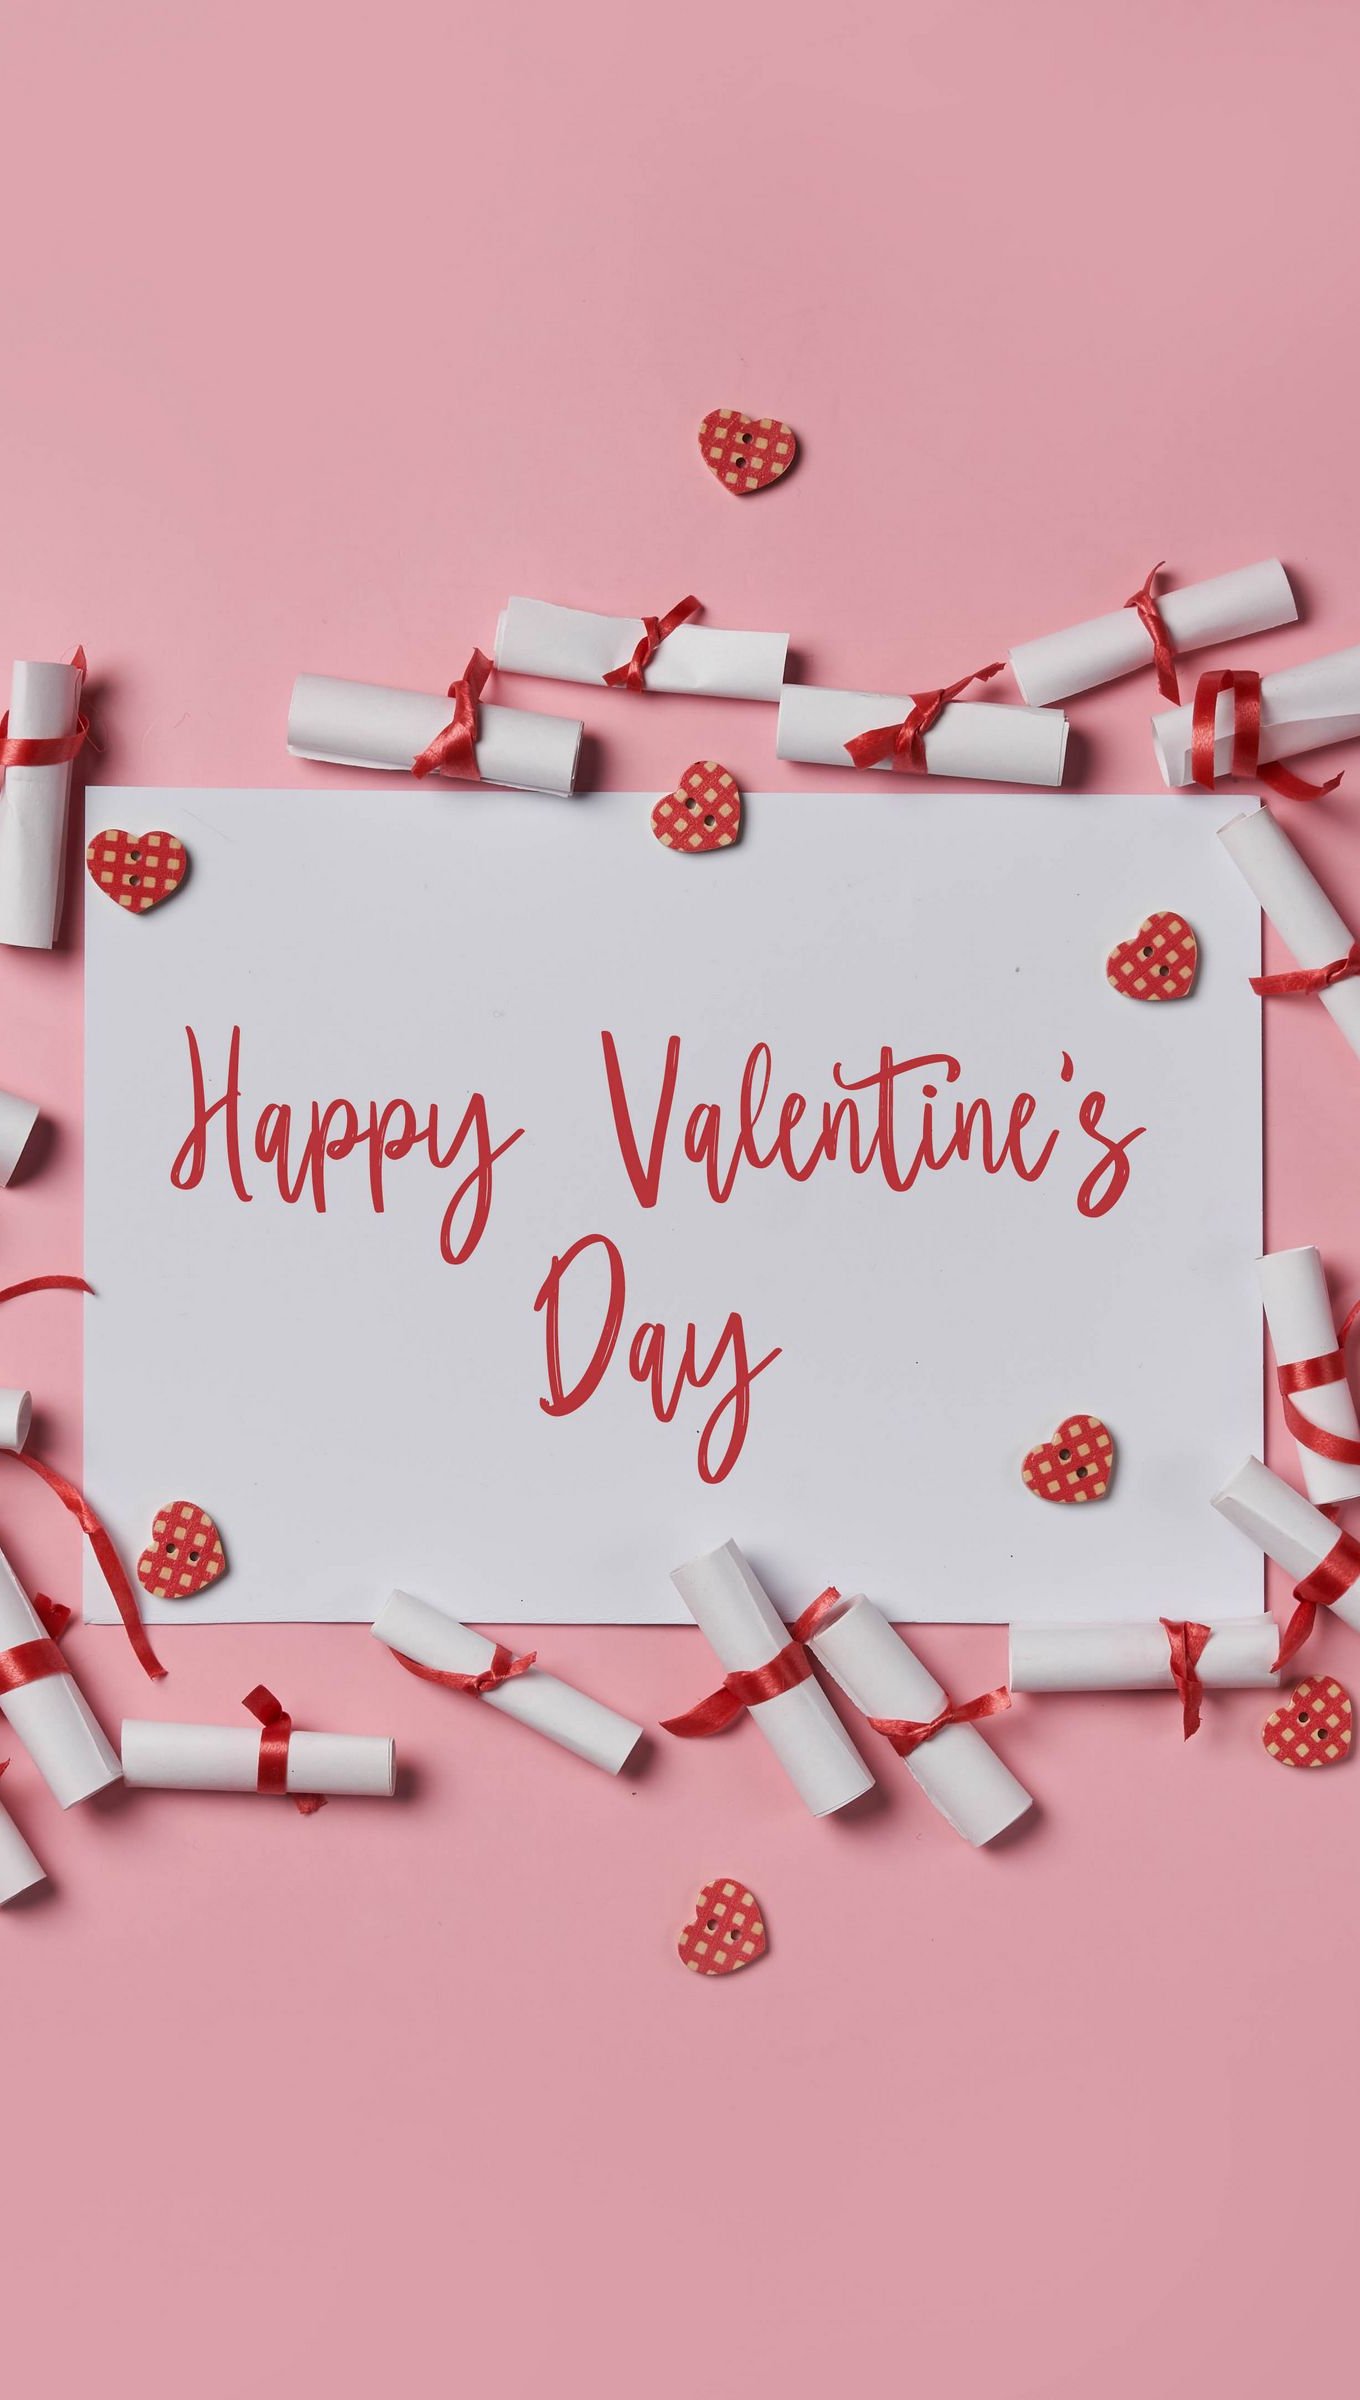 Valentine Hearts and Happy Valentines Day Text. Valentines Day Wallpaper  Stock Illustration - Illustration of background, lettering: 135373819